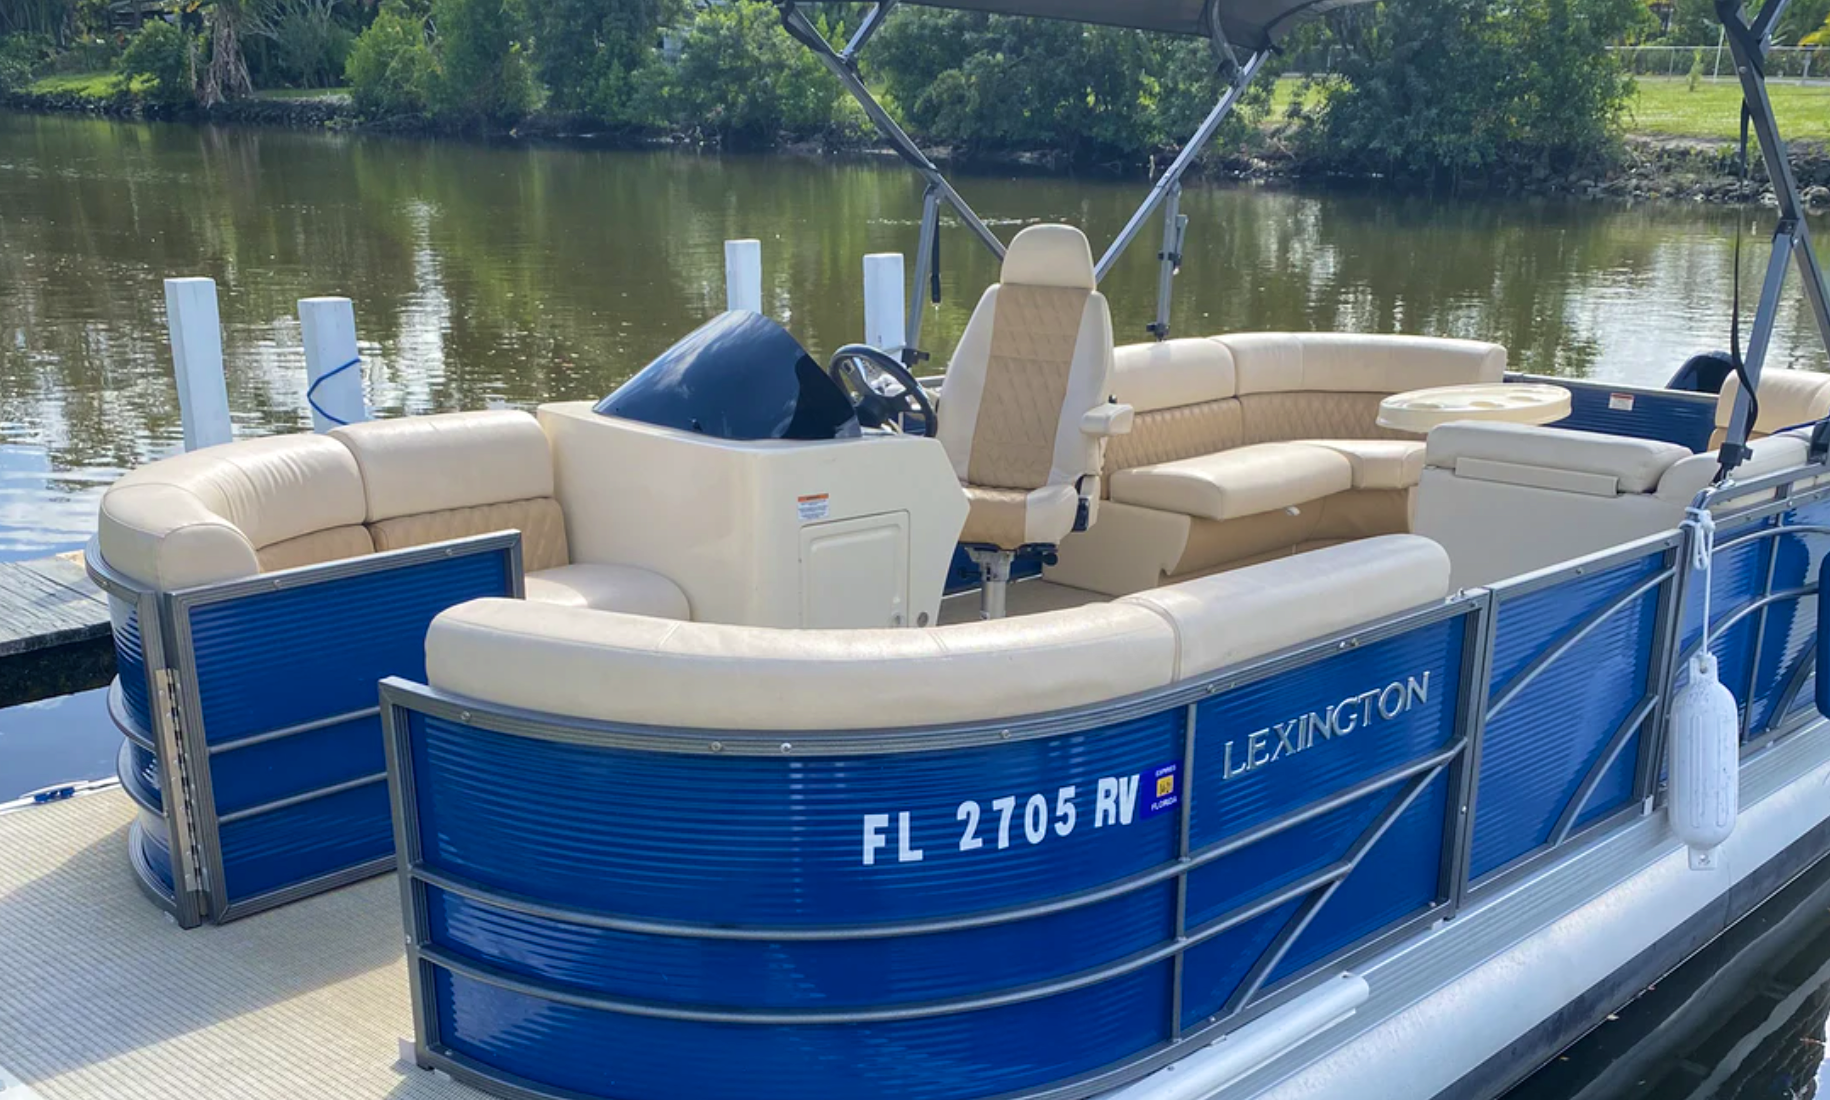 Fun Lexington Pontoon Boats From Naples Florida To Keewaydin Island Gmb Bookings Must Be 7 Days Or More In Advance Of Charter Date Getmyboat